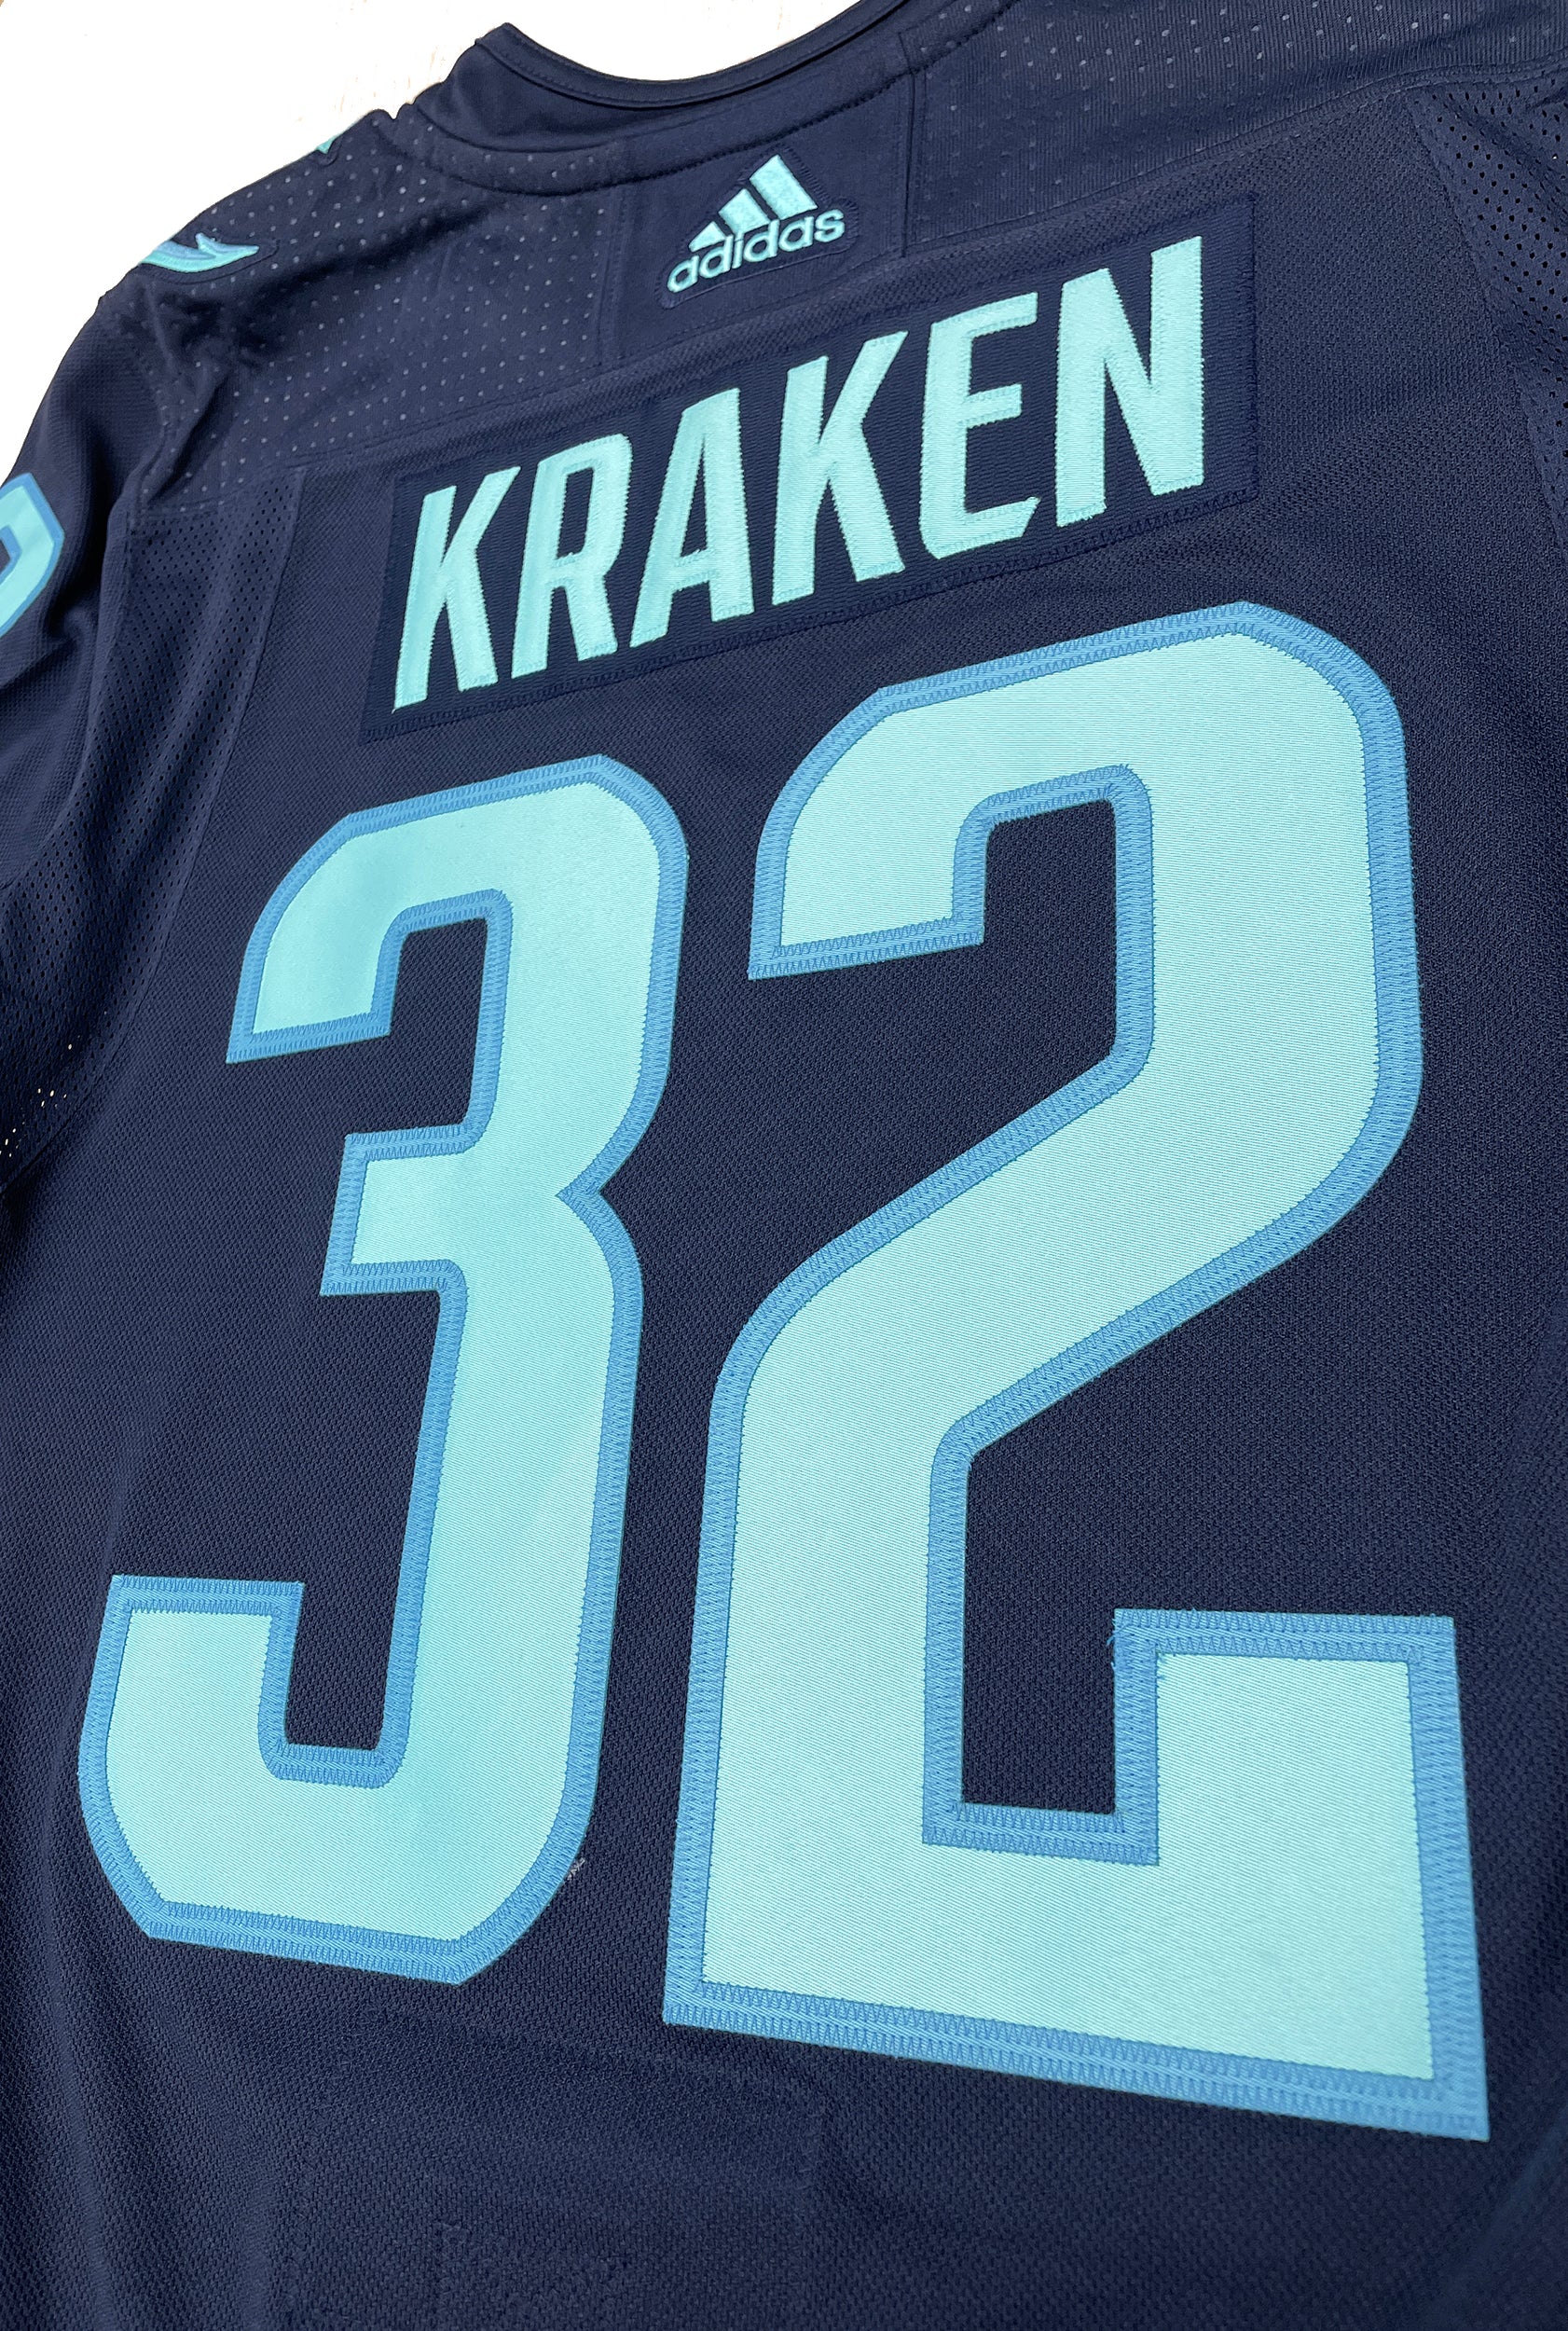 ANY NAME AND NUMBER SEATTLE KRAKEN AUTHENTIC HOME OR AWAY ADIDAS NHL J –  Hockey Authentic